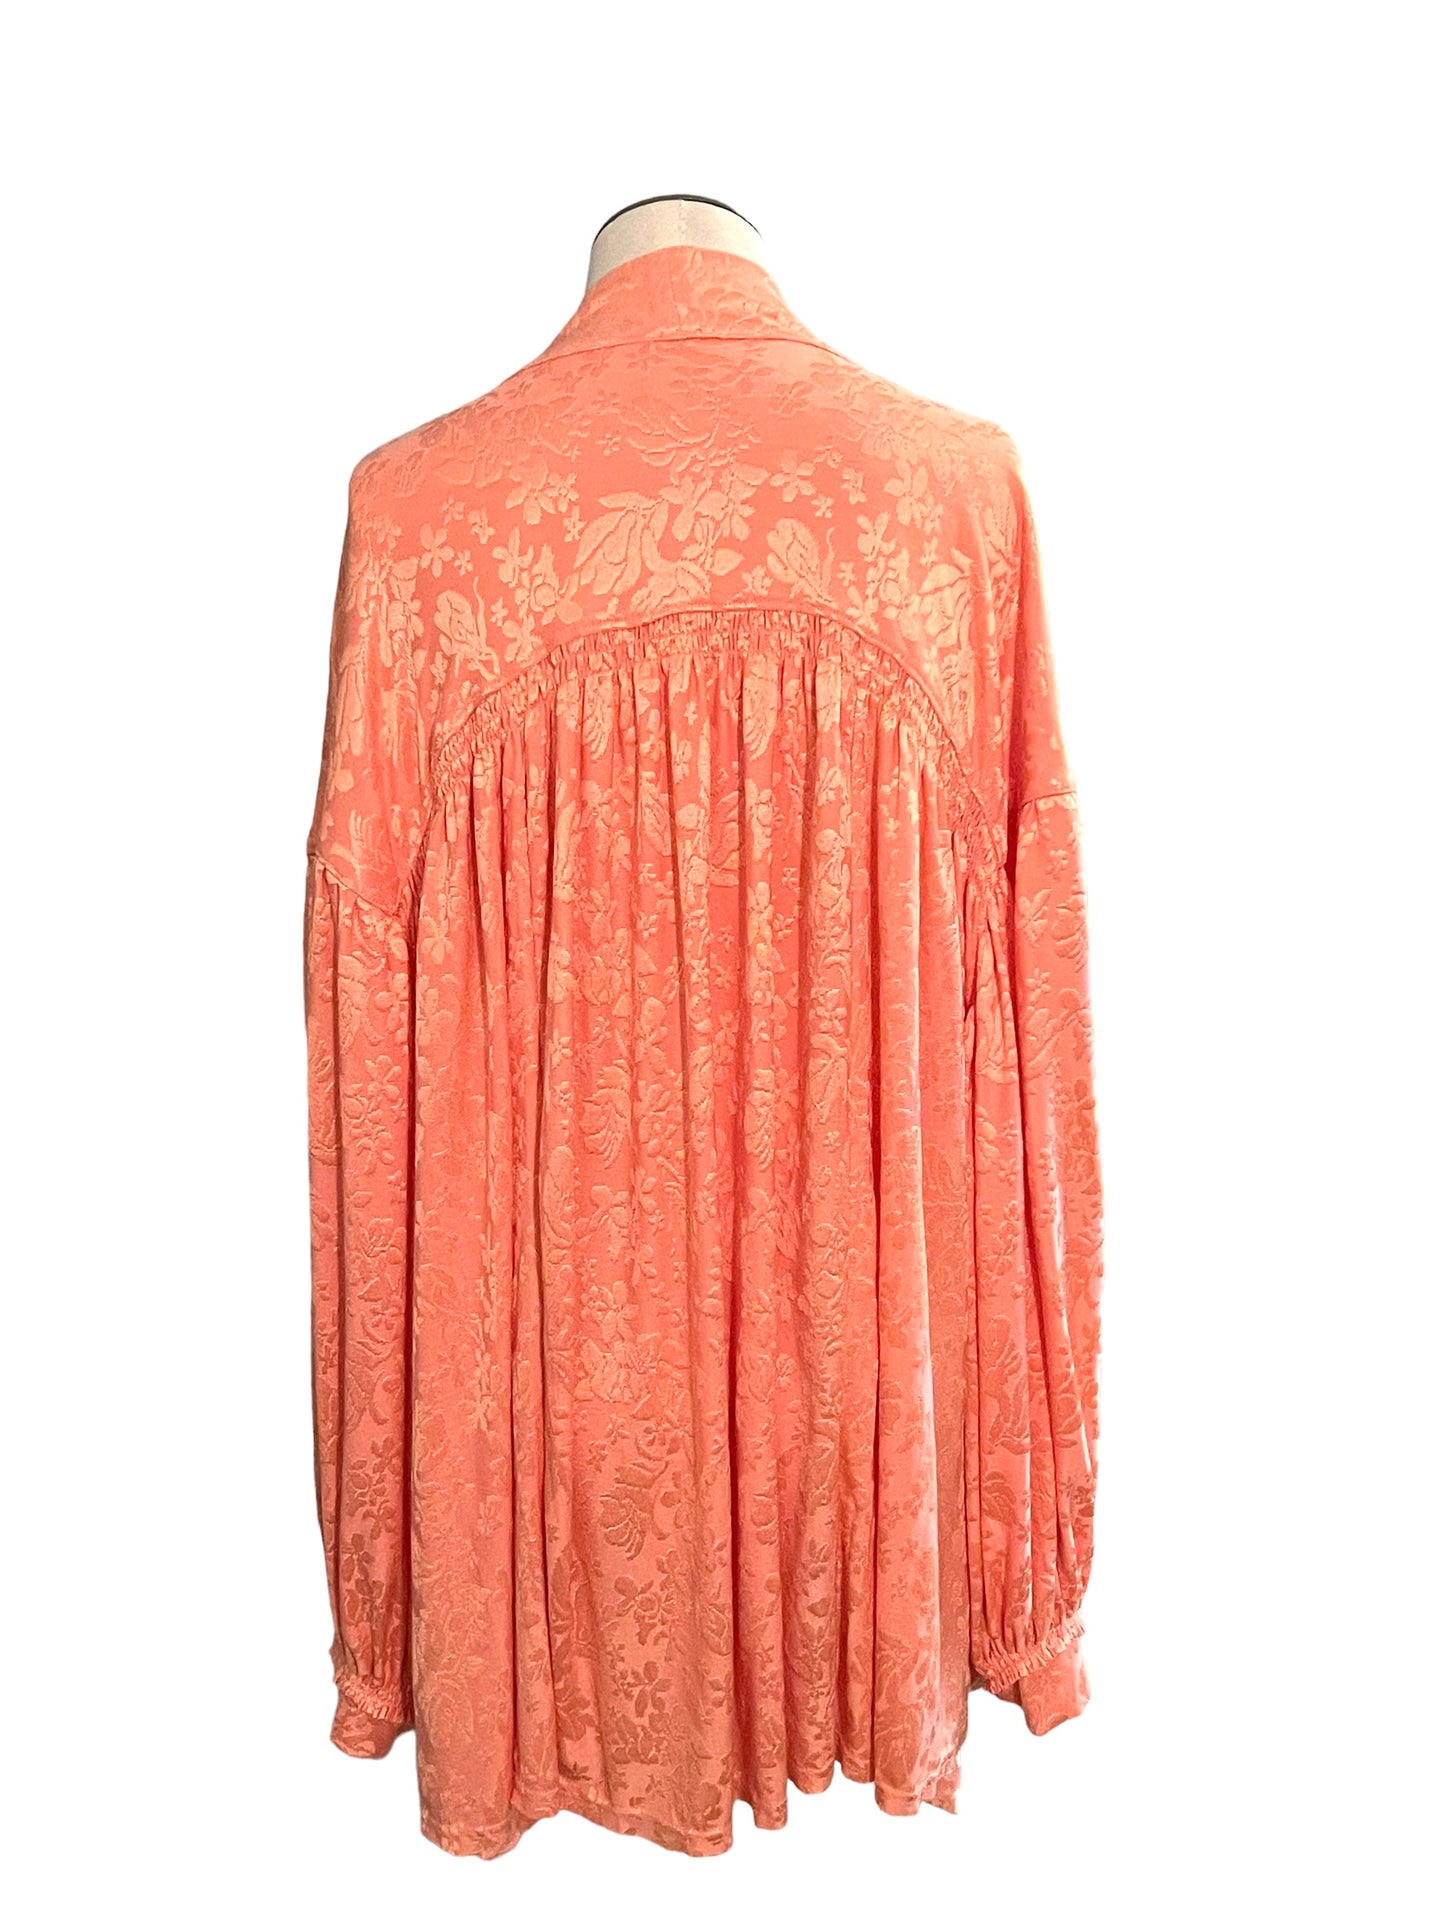 Free People Coral Floral Print Size M Tie Neck Blouse